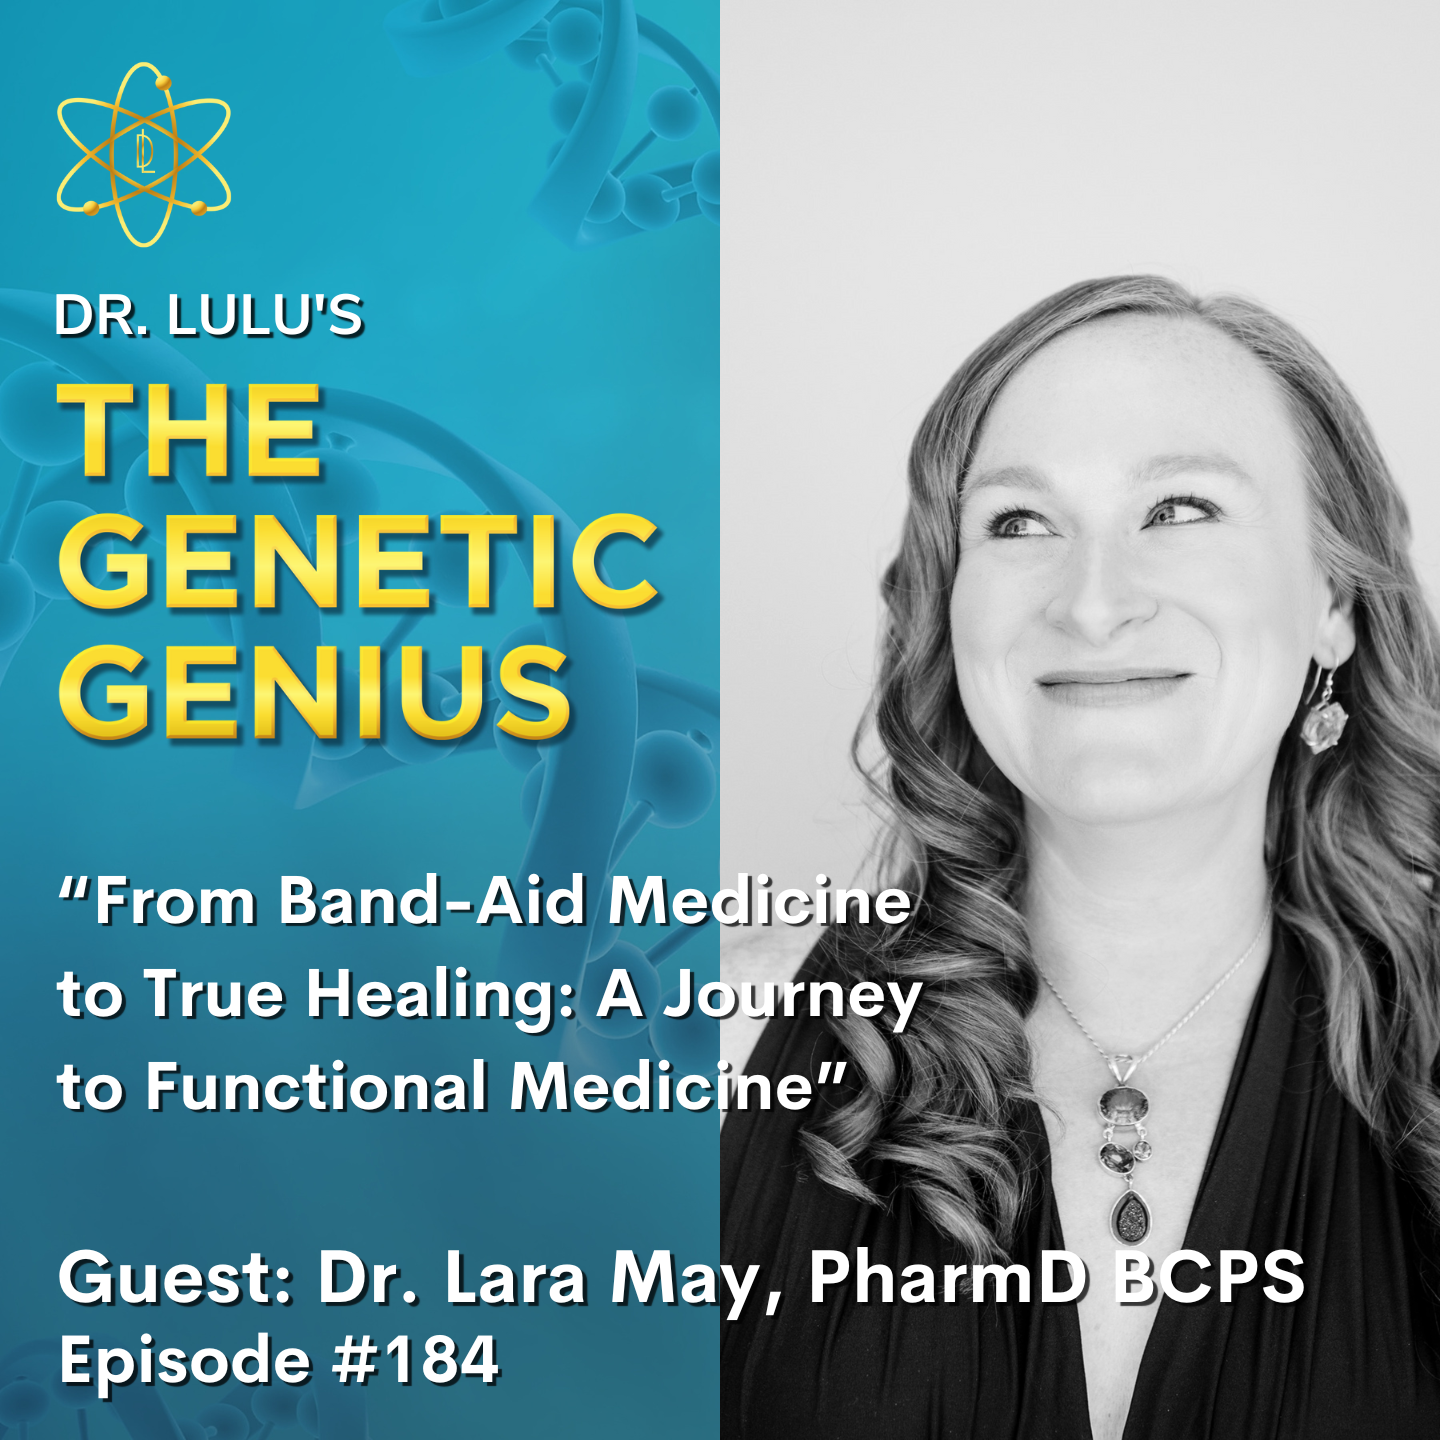 FROM BAND-AID MEDICINE TO TRUE HEALING: A JOURNEY TO FUNCTIONAL MEDICINE WITH DR. LARA MAY, PHARMD BCPS